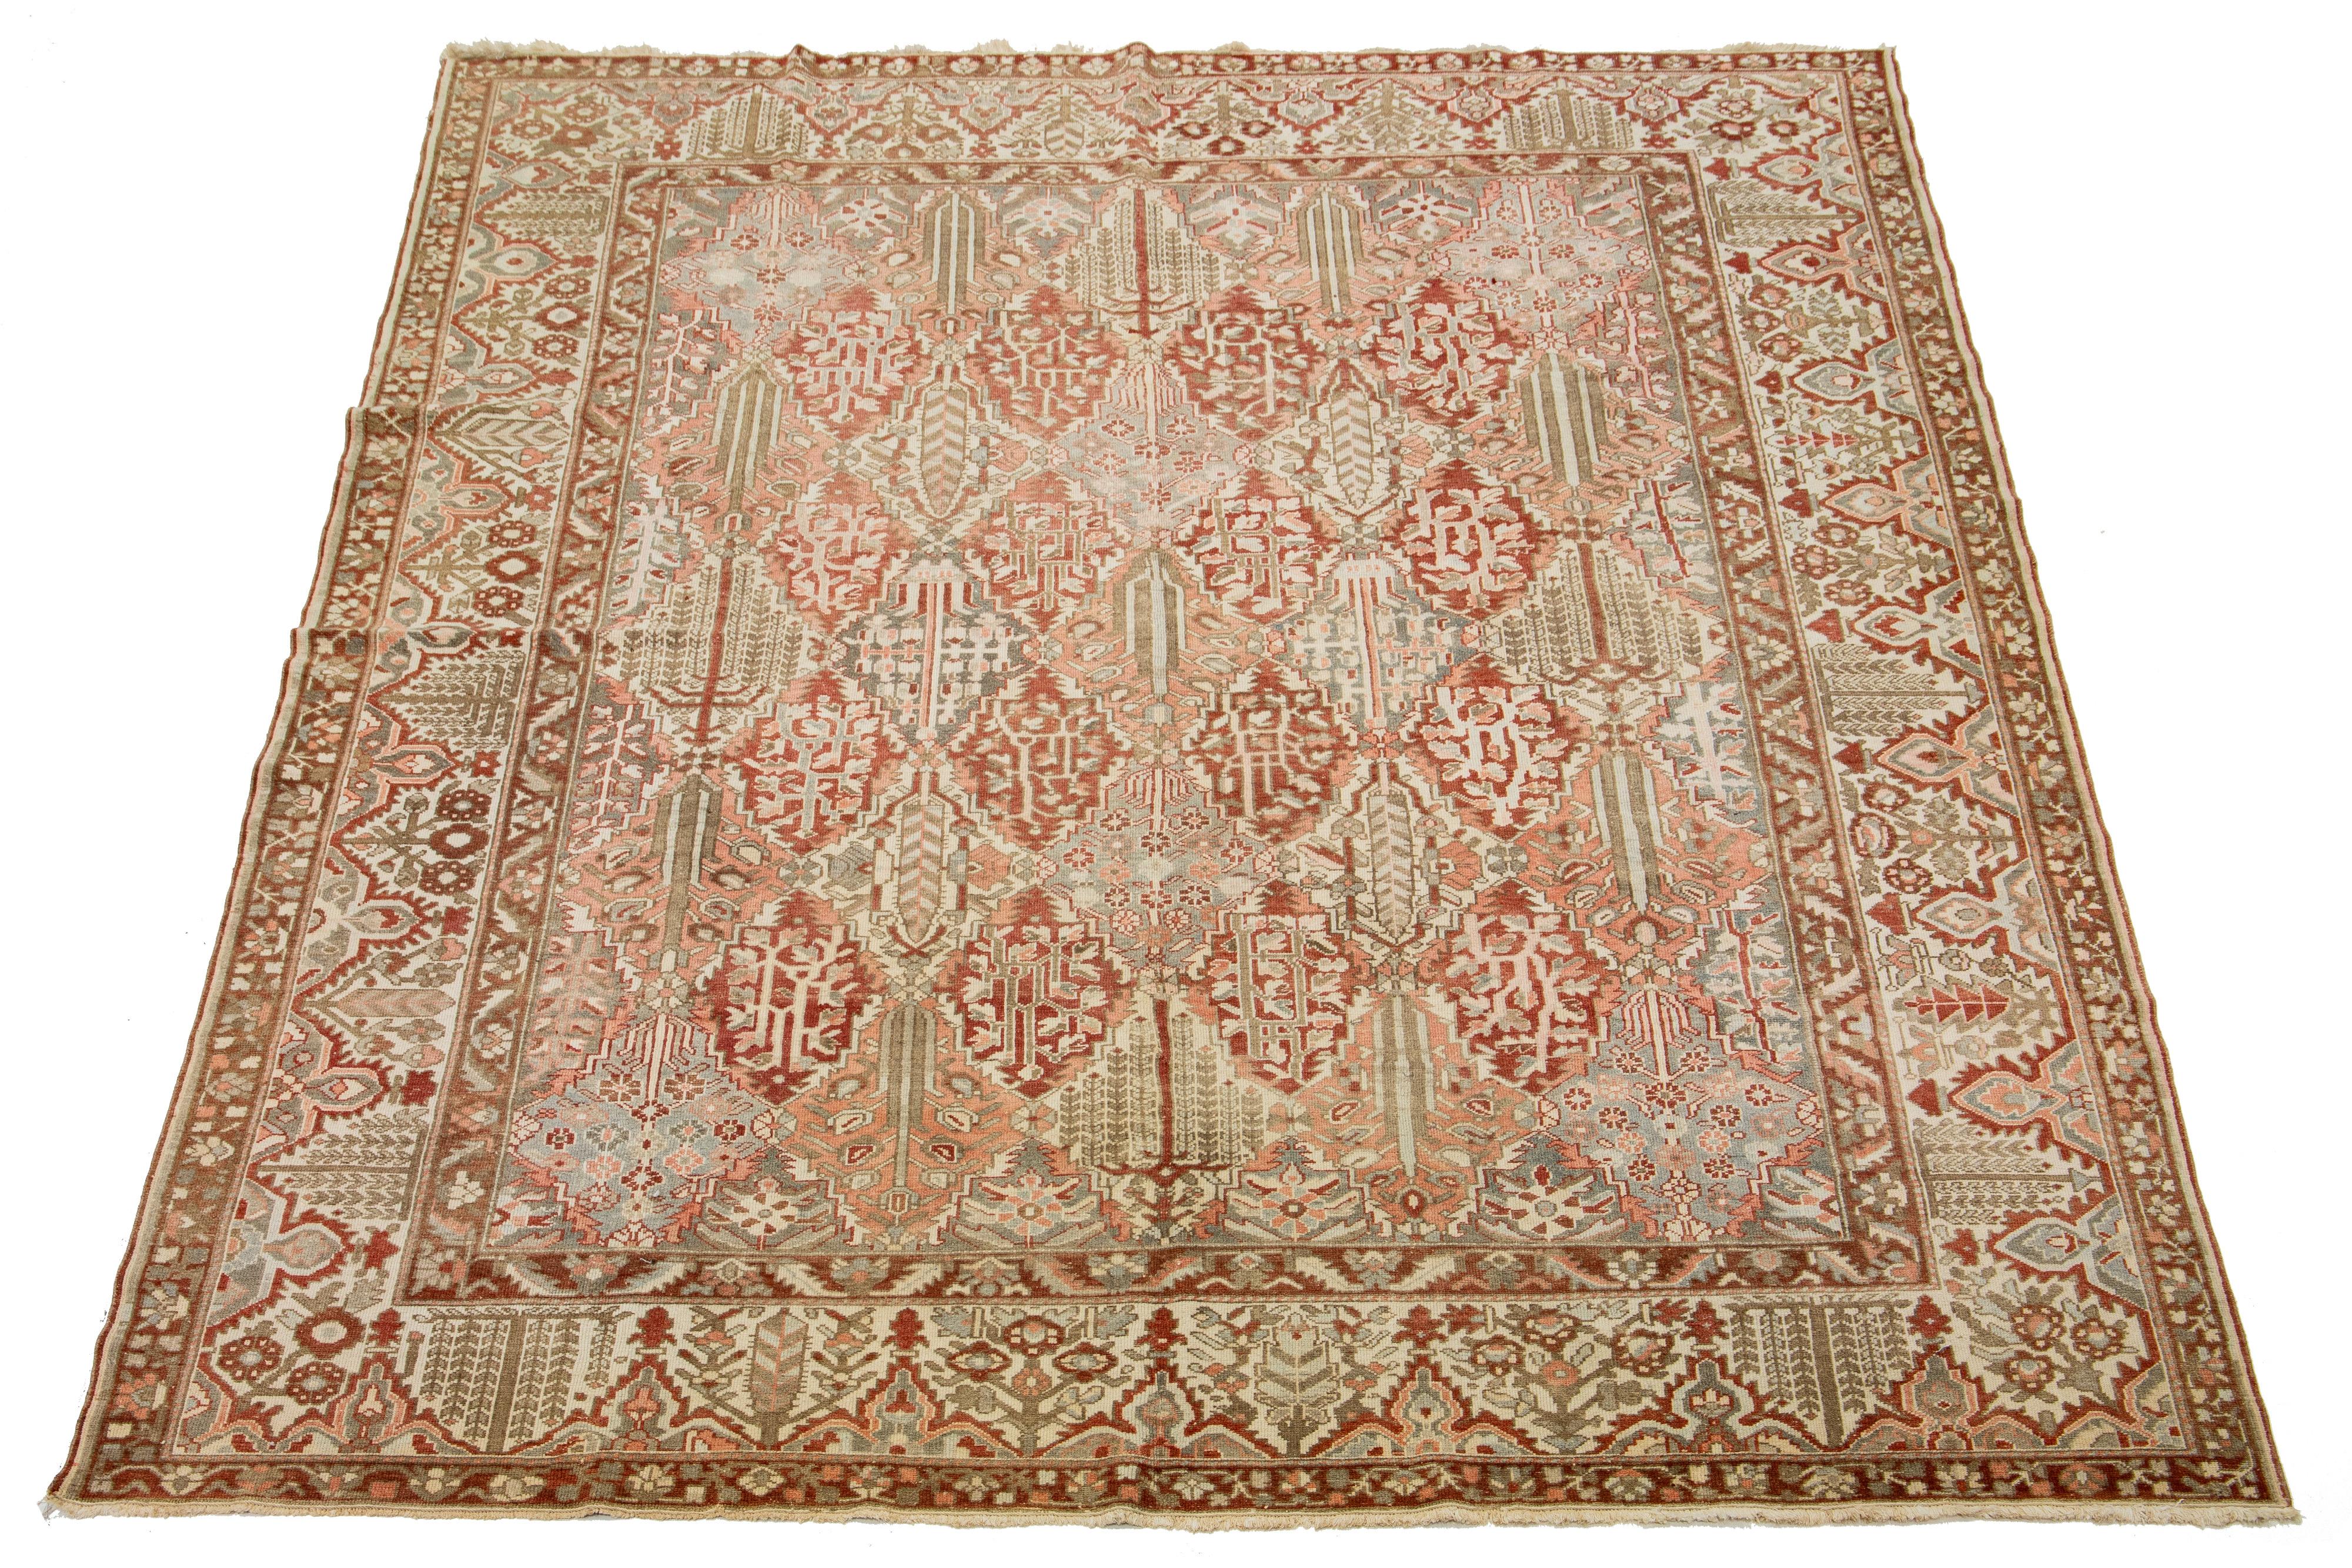 This beautiful Antique Bakhtiari hand-knotted wool rug features a red-rust color field. It showcases a classic Persian design with blue, beige, and peach floral colors.

This rug measures 10'8